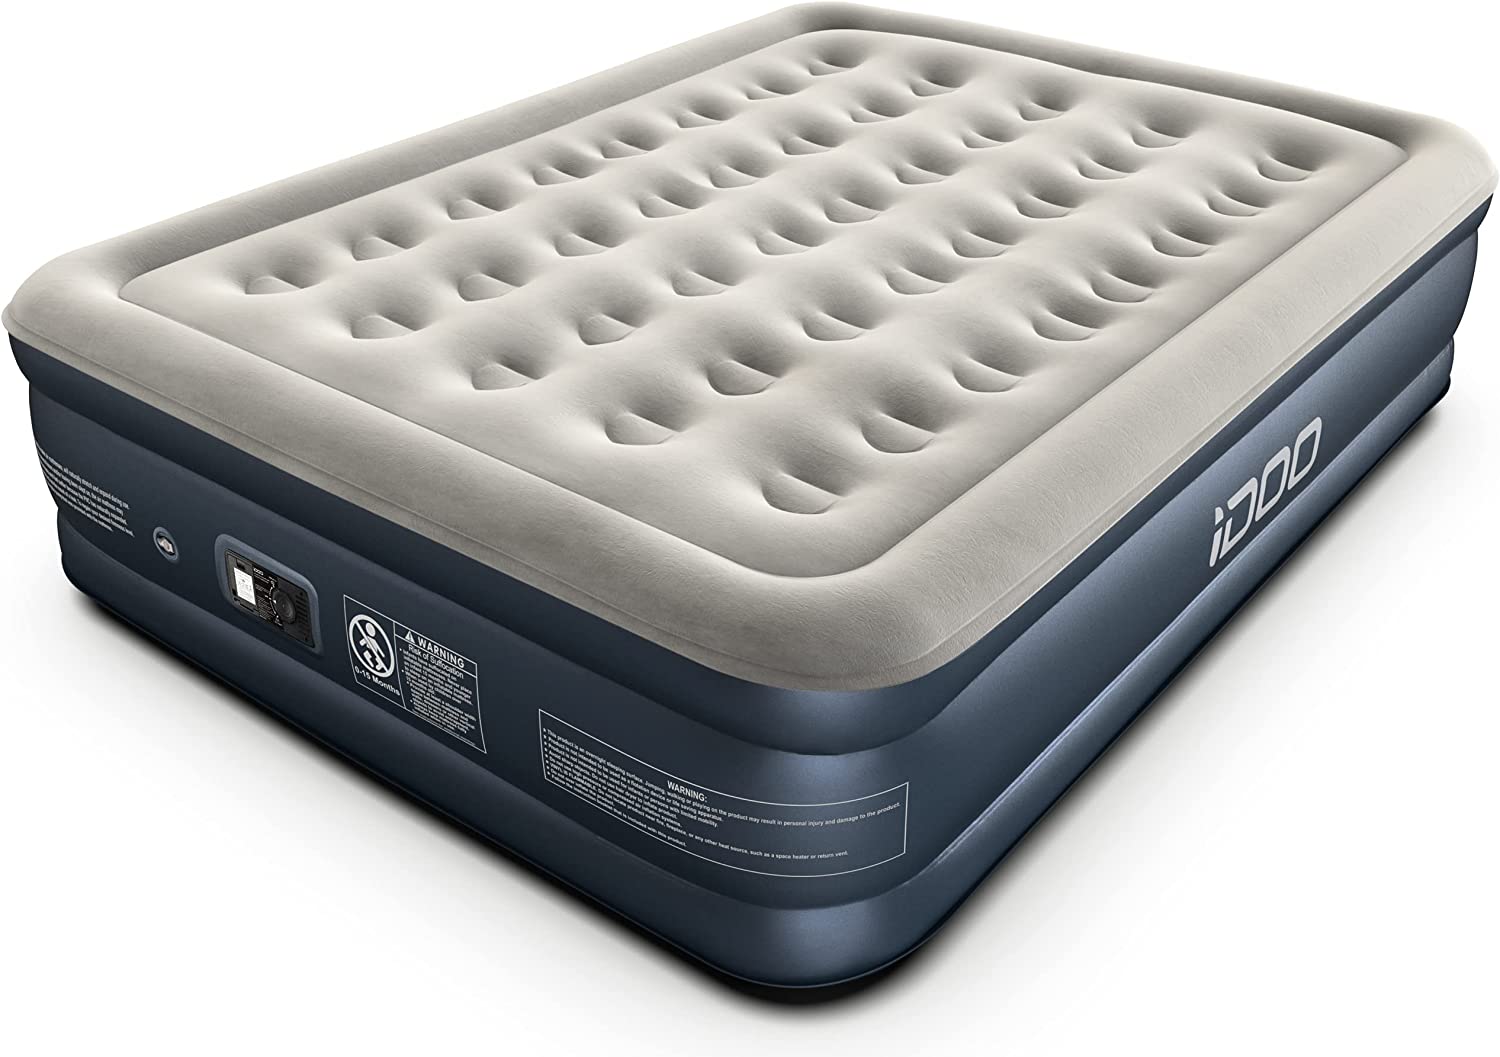 iDOO King size Air Bed, Inflatable bed with Built-in Pump